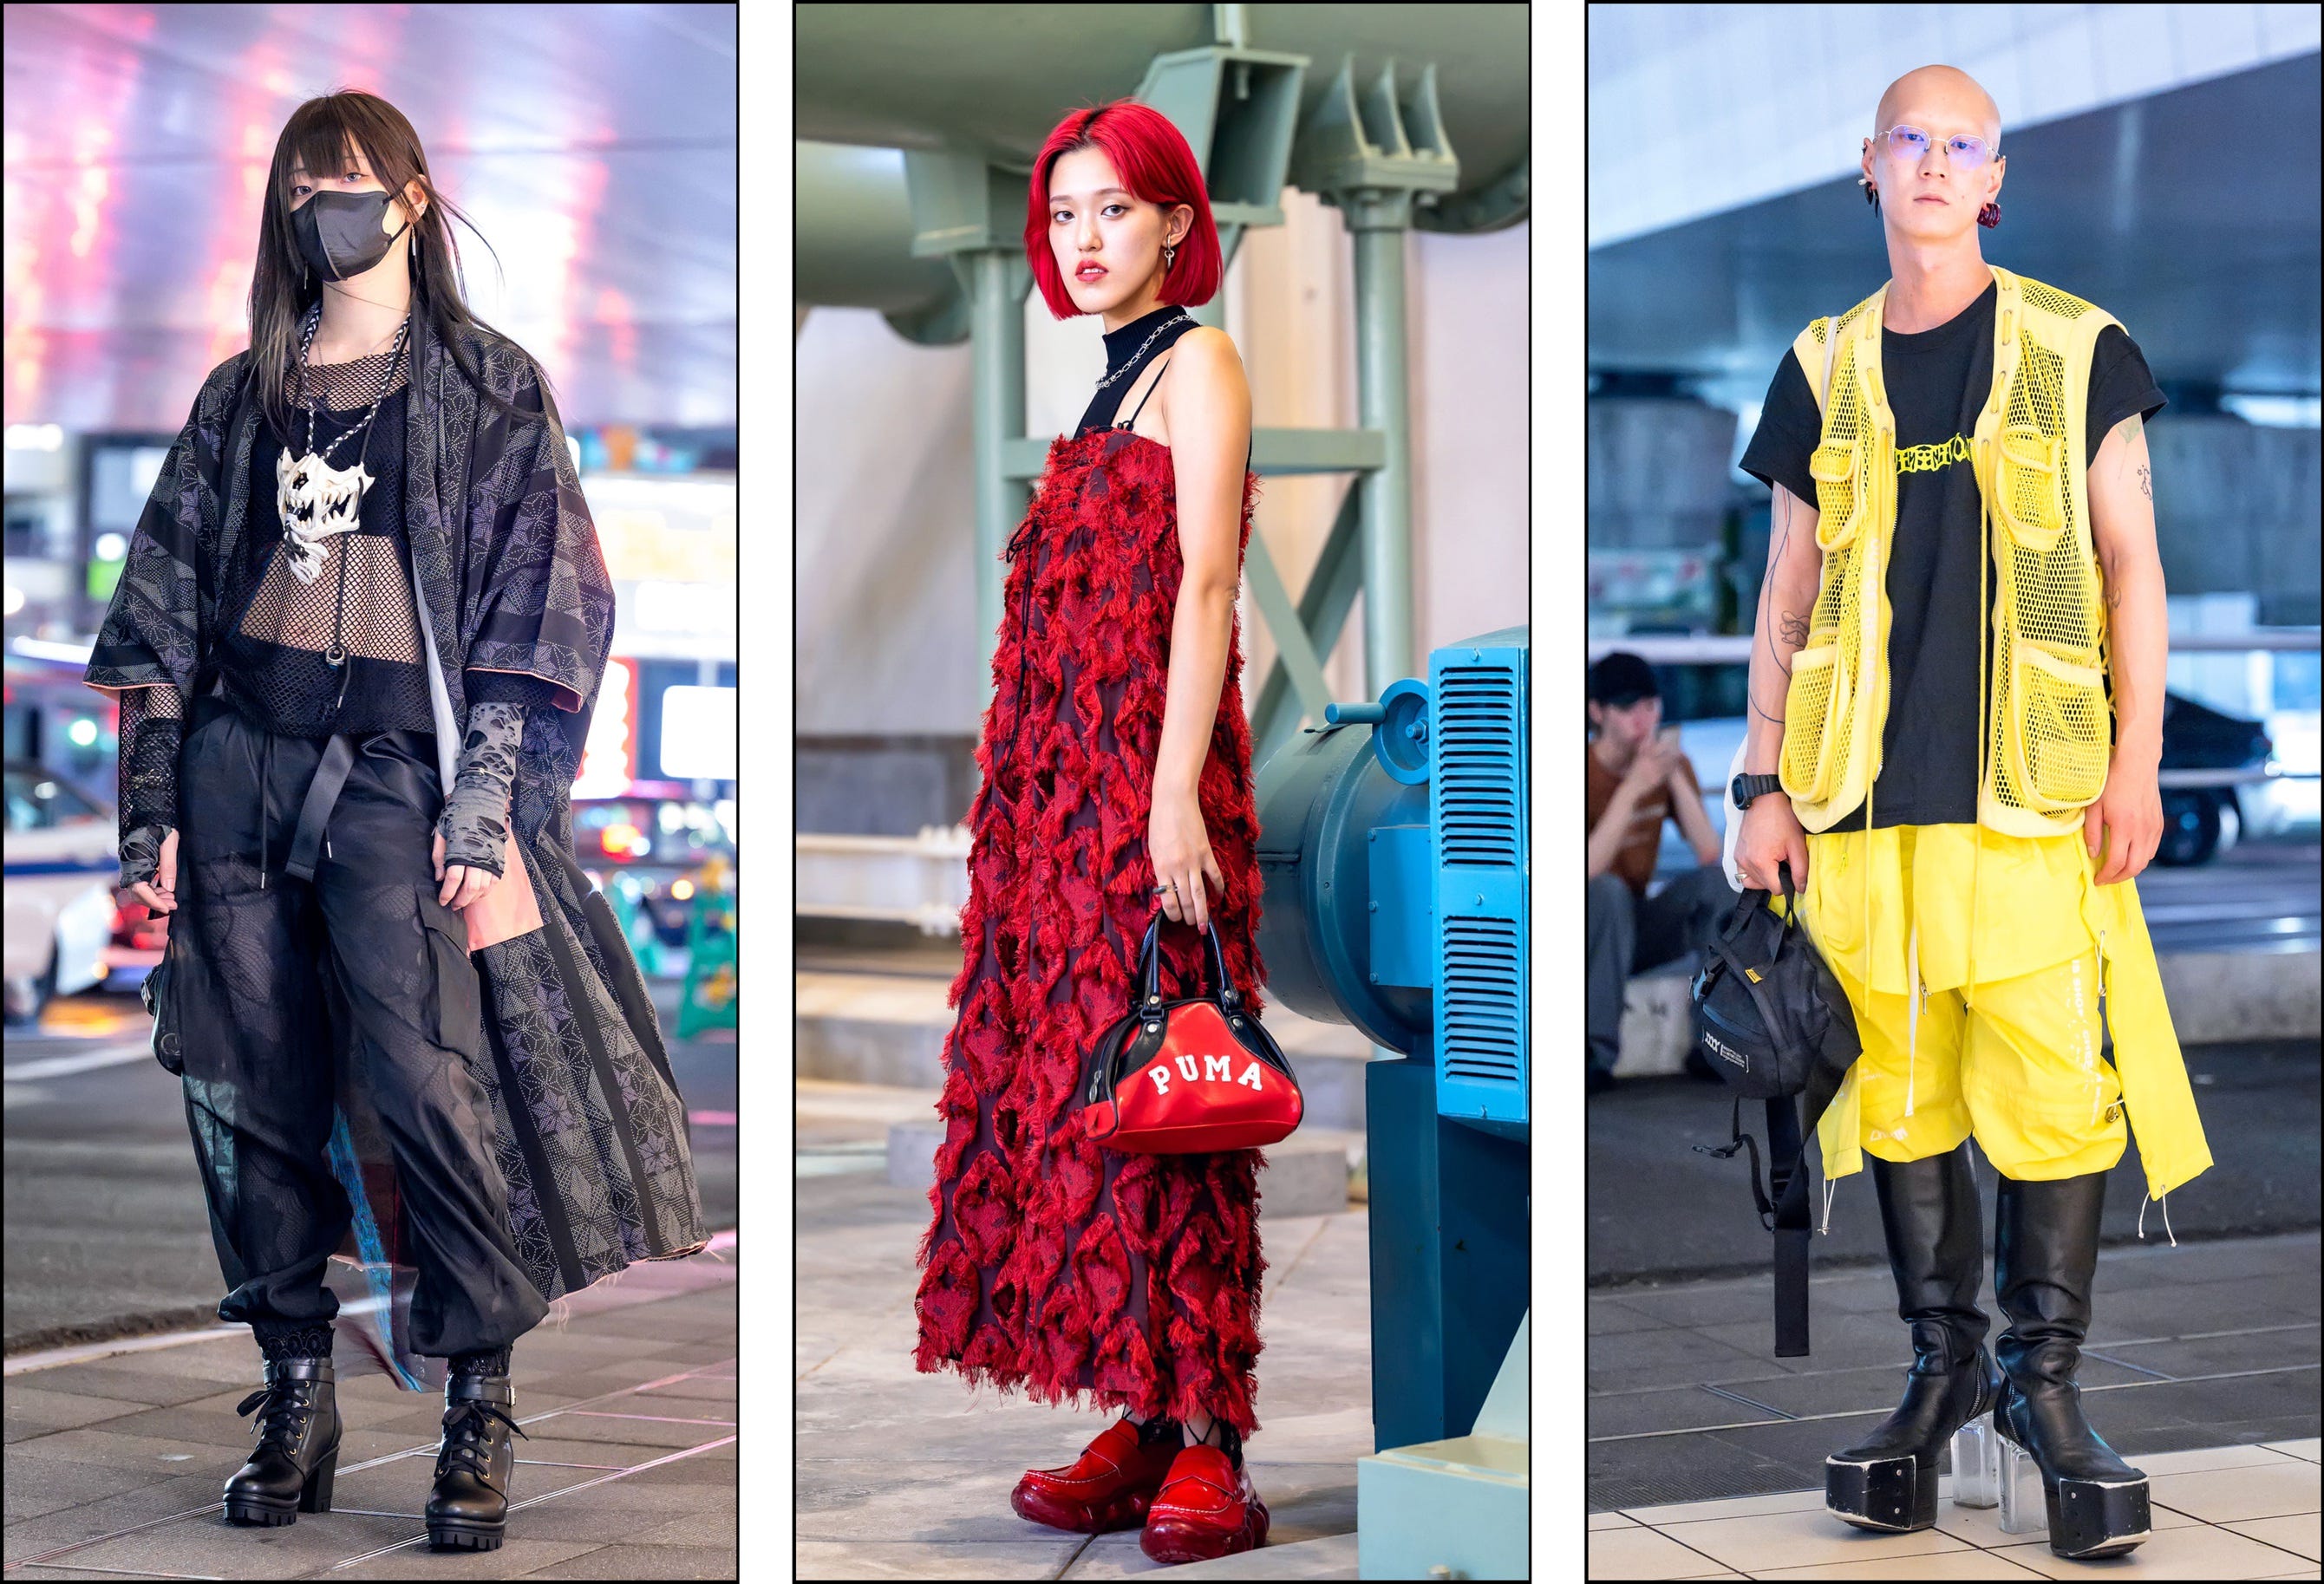 FEATURE: The Best Japanese Street Style From TOKYO FASHION WEEK